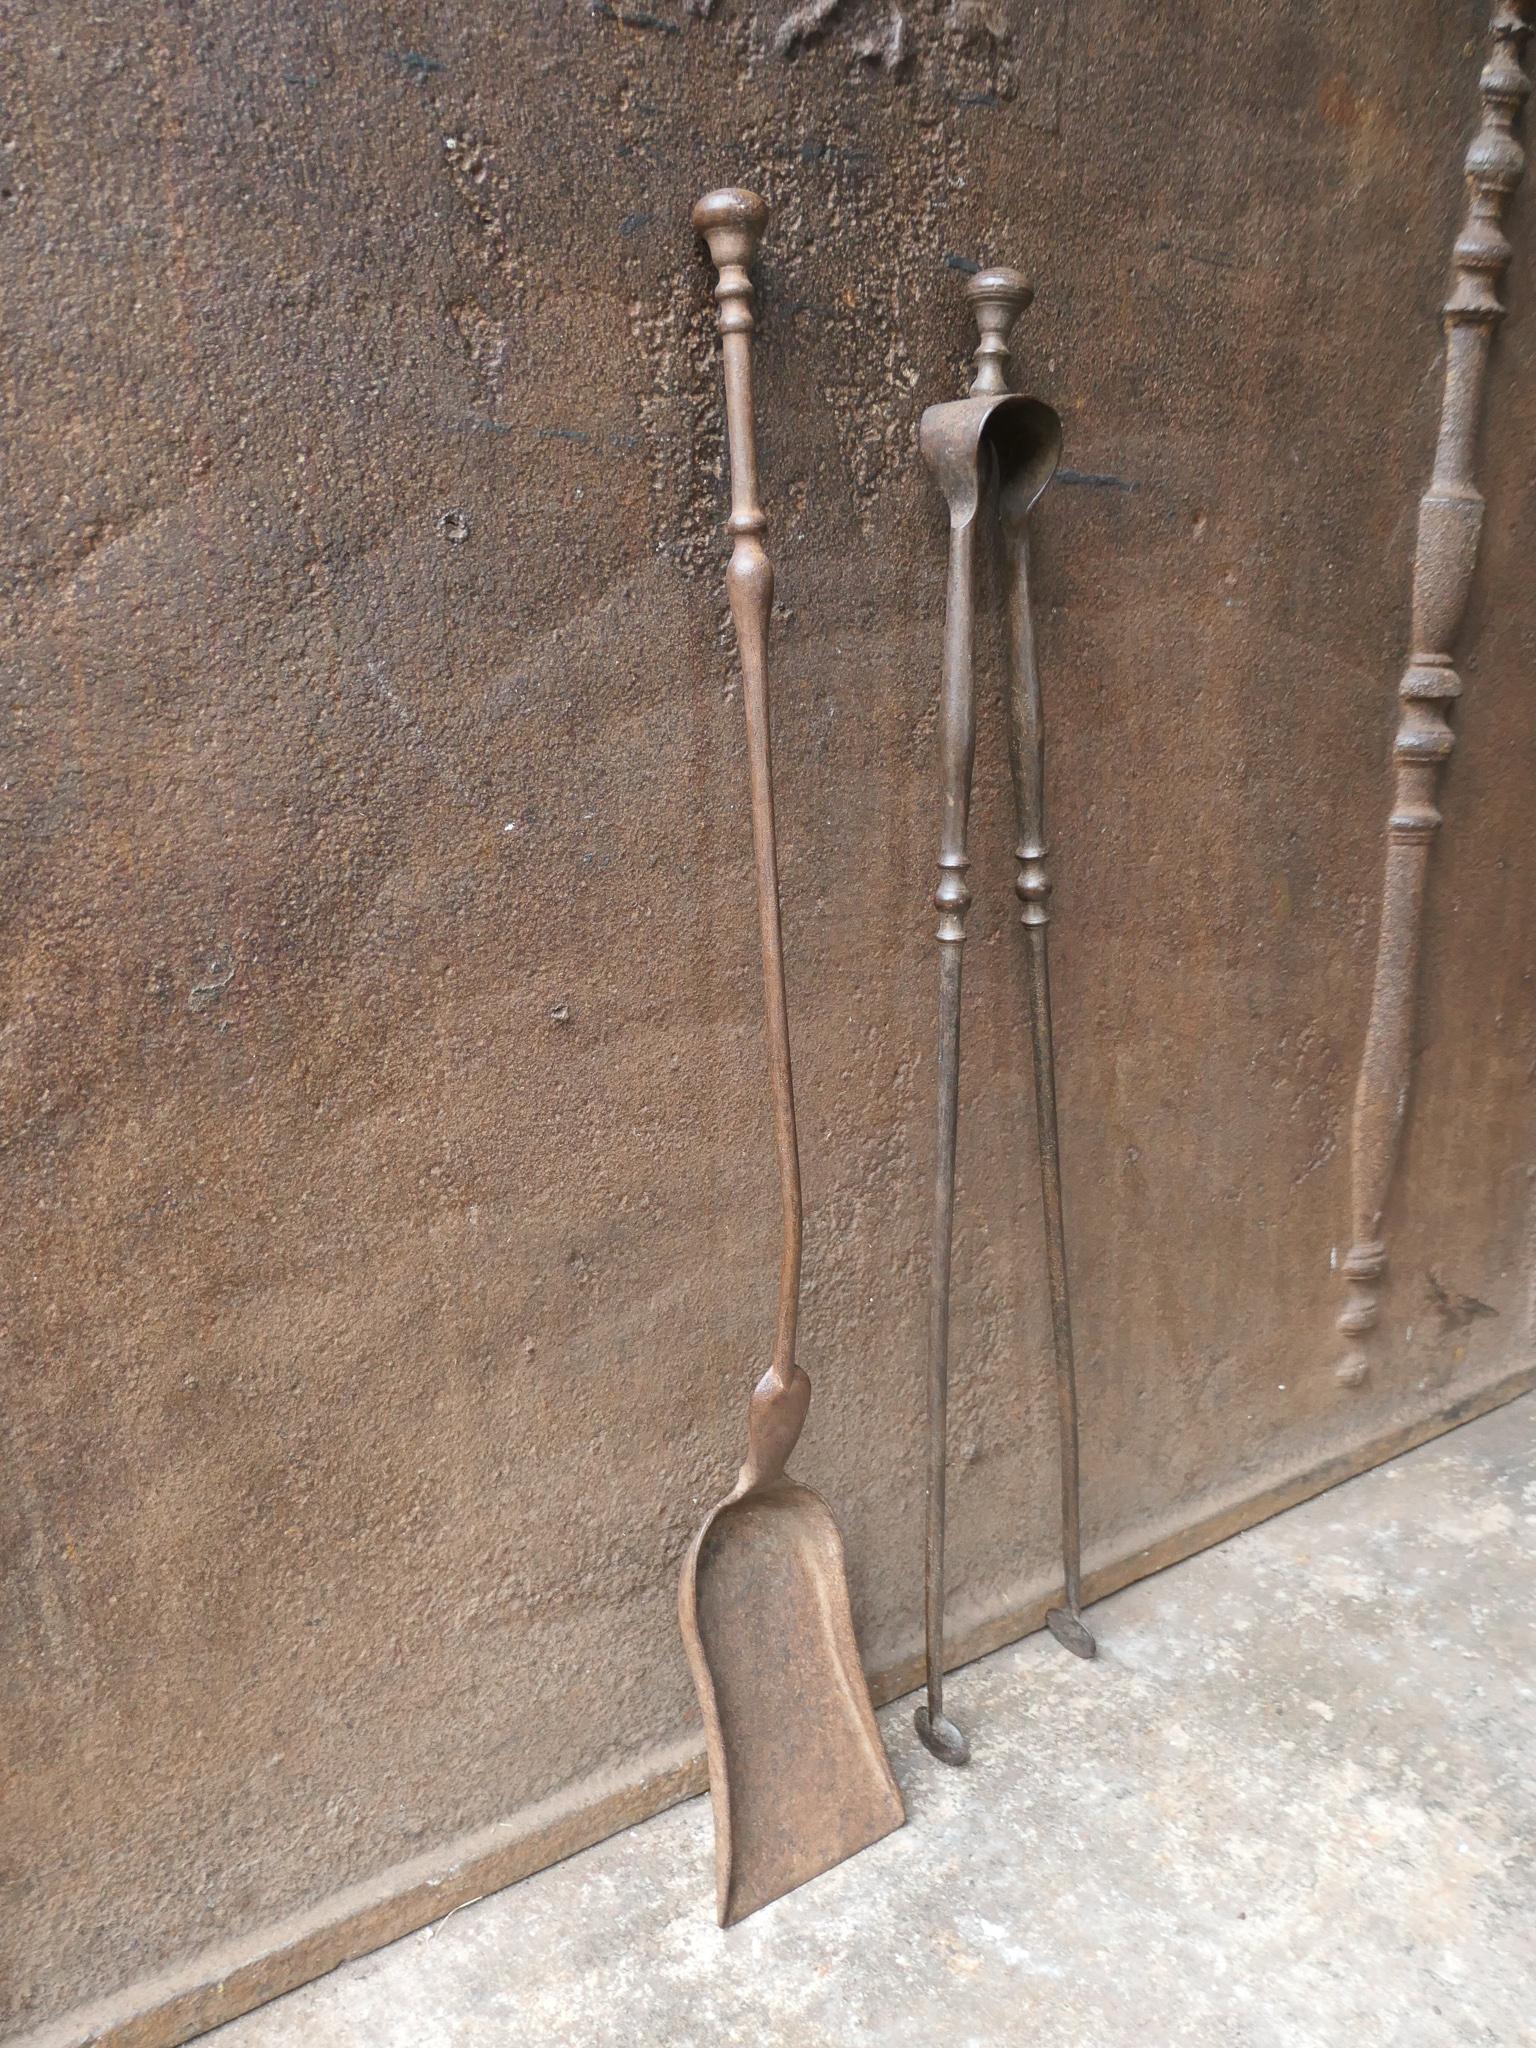 19th century French Napoleon III fireplace tools. The tool set consists of tongs and shovel. Made of wrought iron. It is in a good condition and is fully functional.